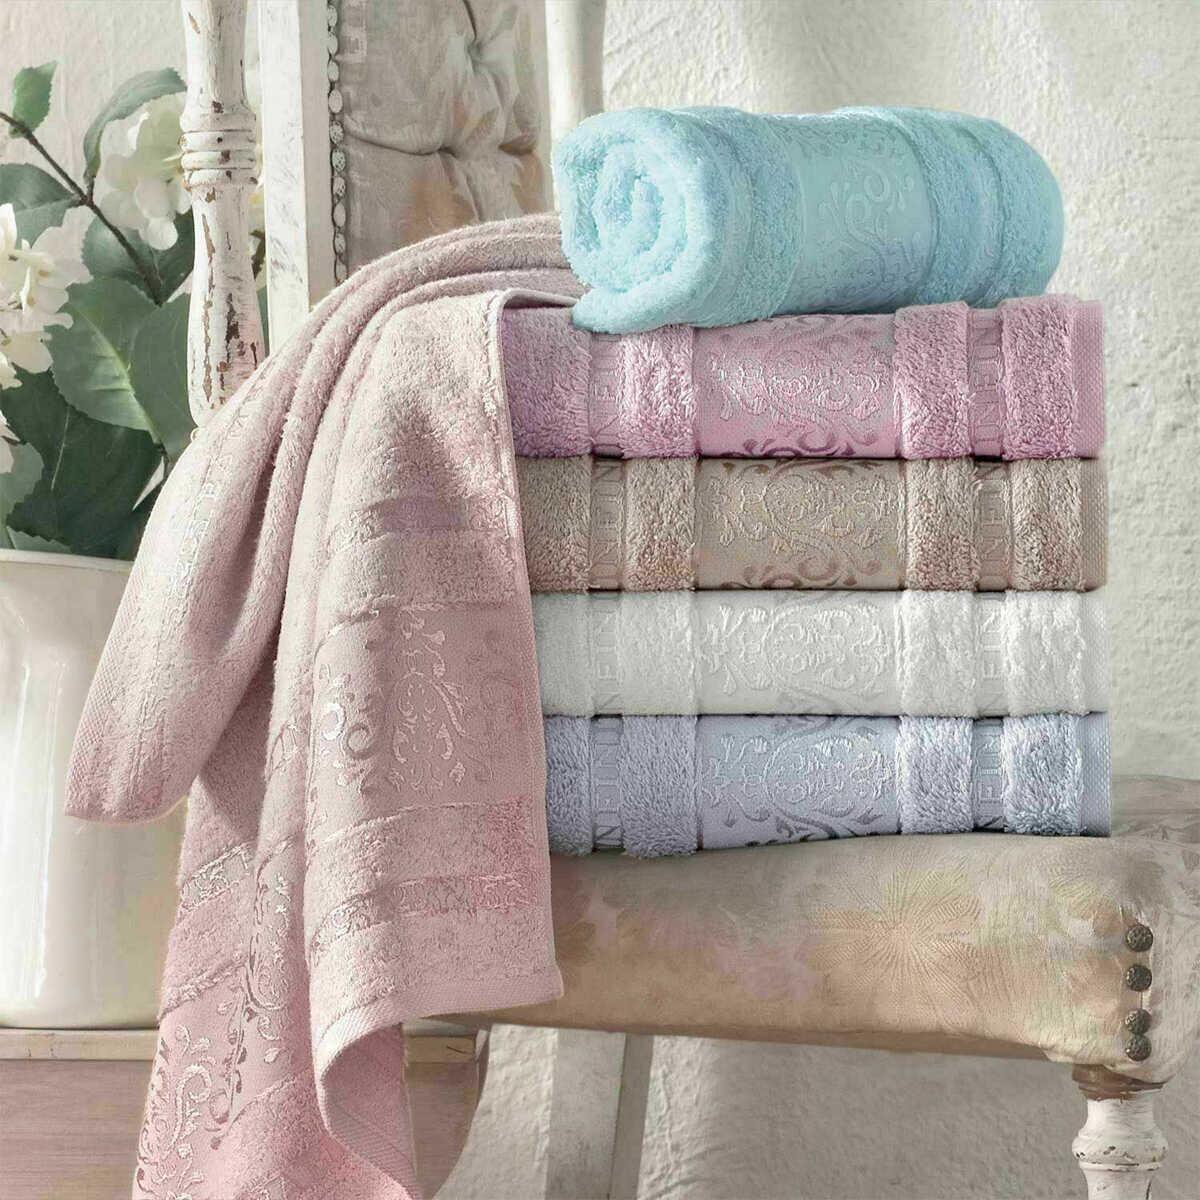 Maxstyle Crystal Bamboo Mint Towel 70x140 cm